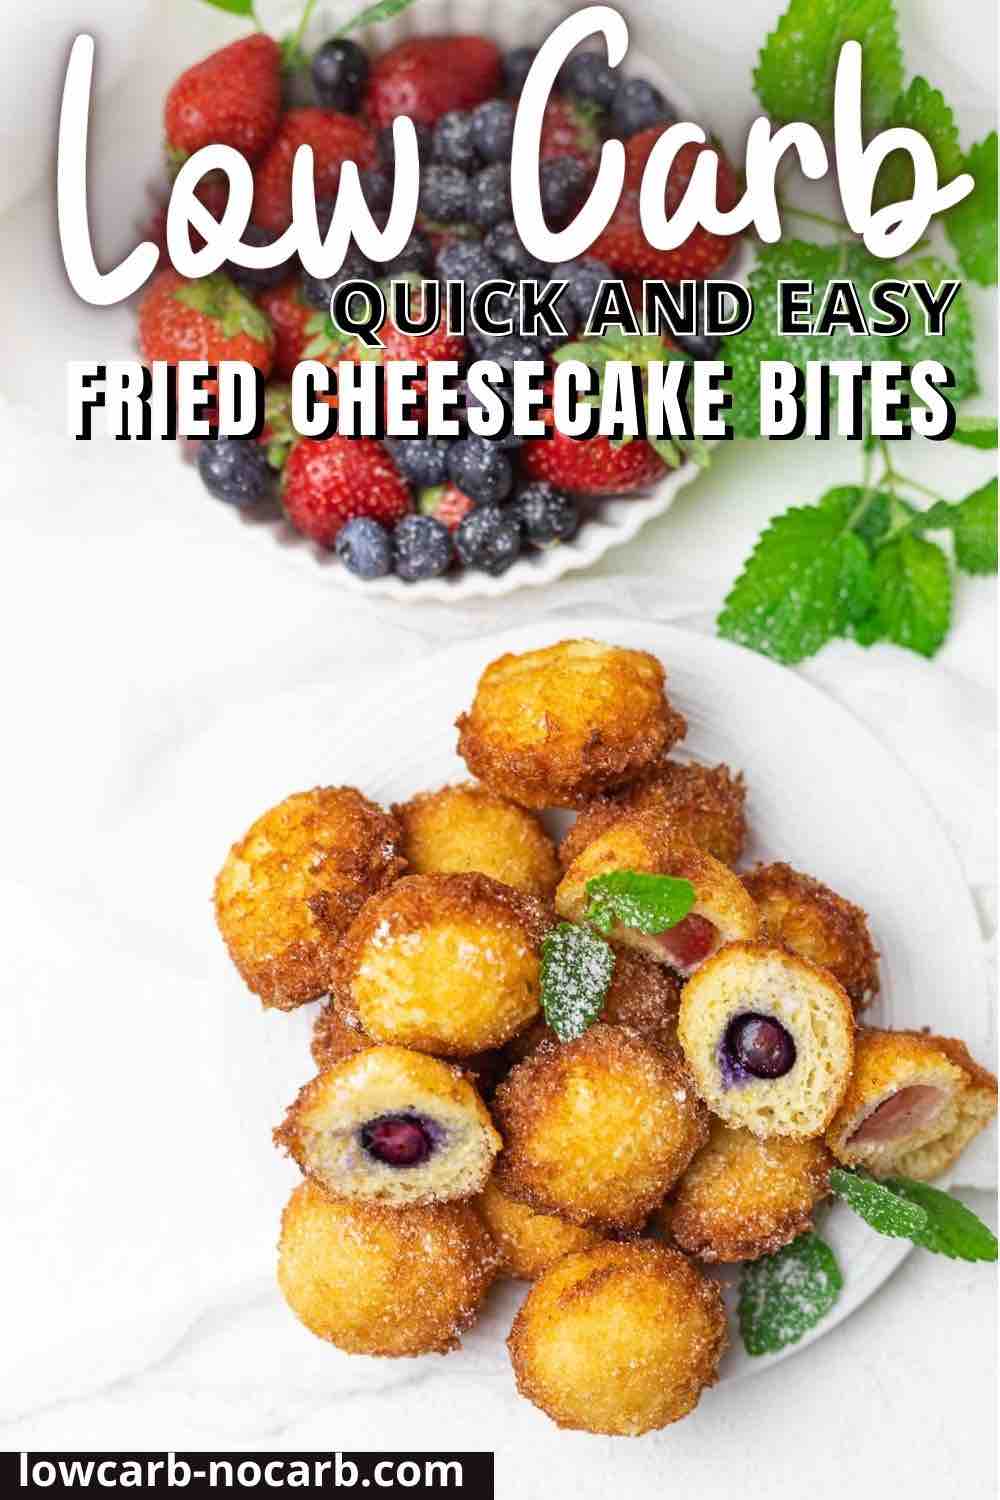 Low carb quick and easy fried cheesecake bites.